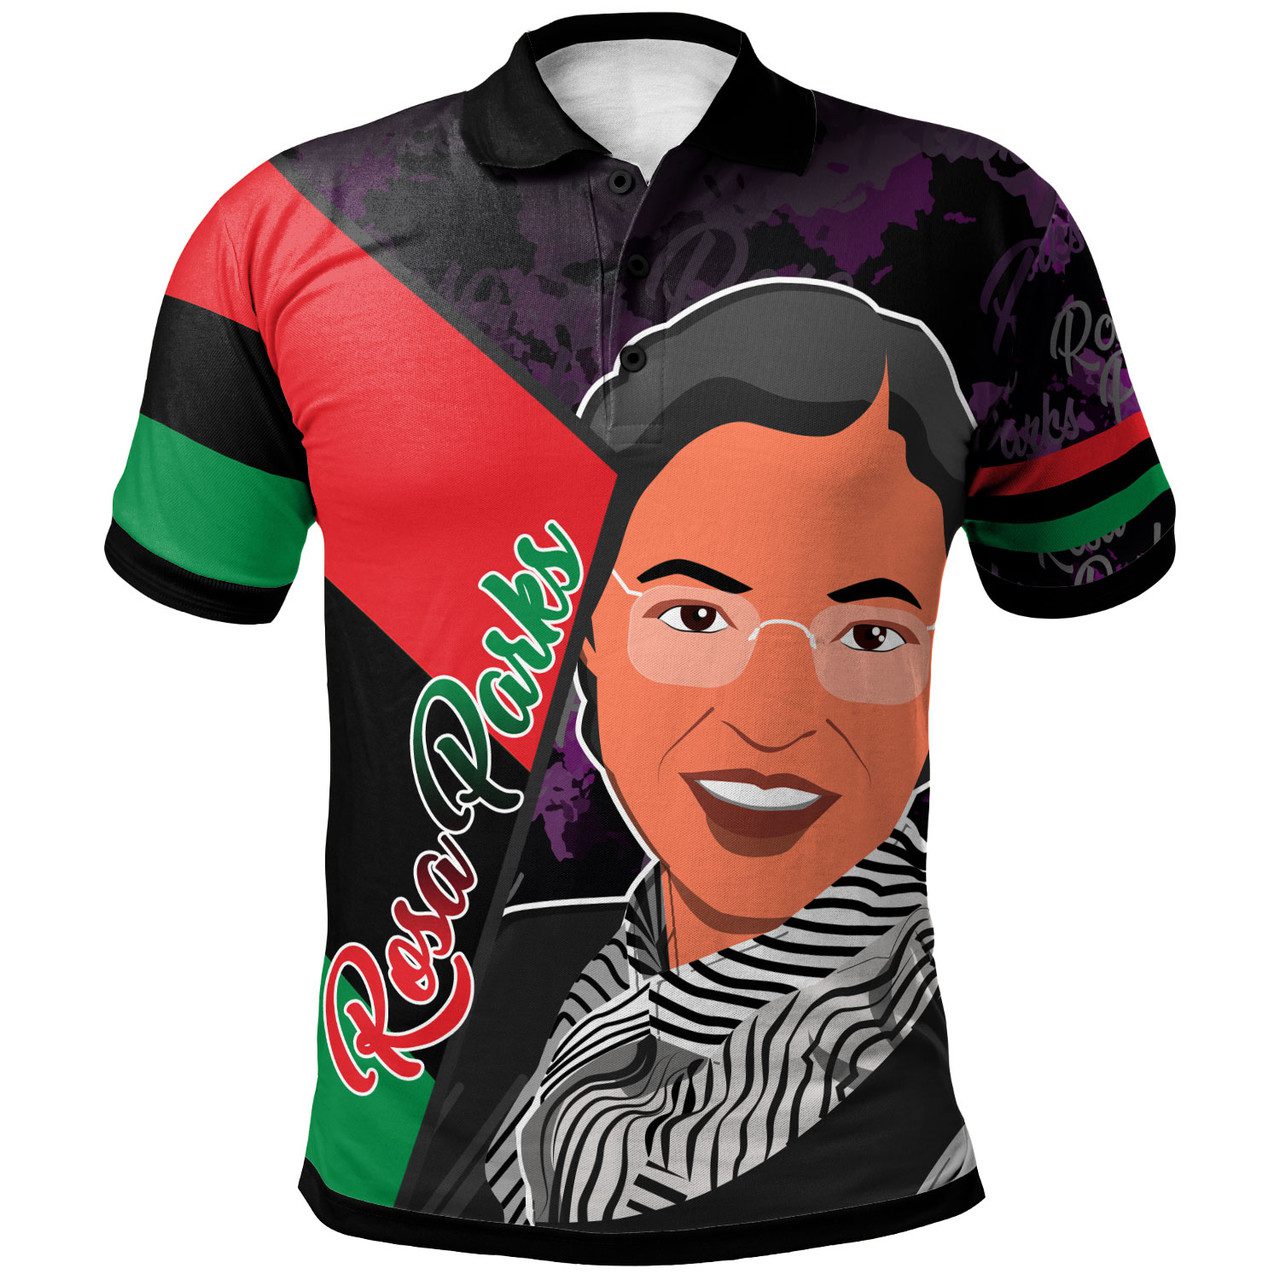 Black History Month Polo Shirt – Rosa Parks Civil Rights Leader With Pan Africa Flag Polo Shirt